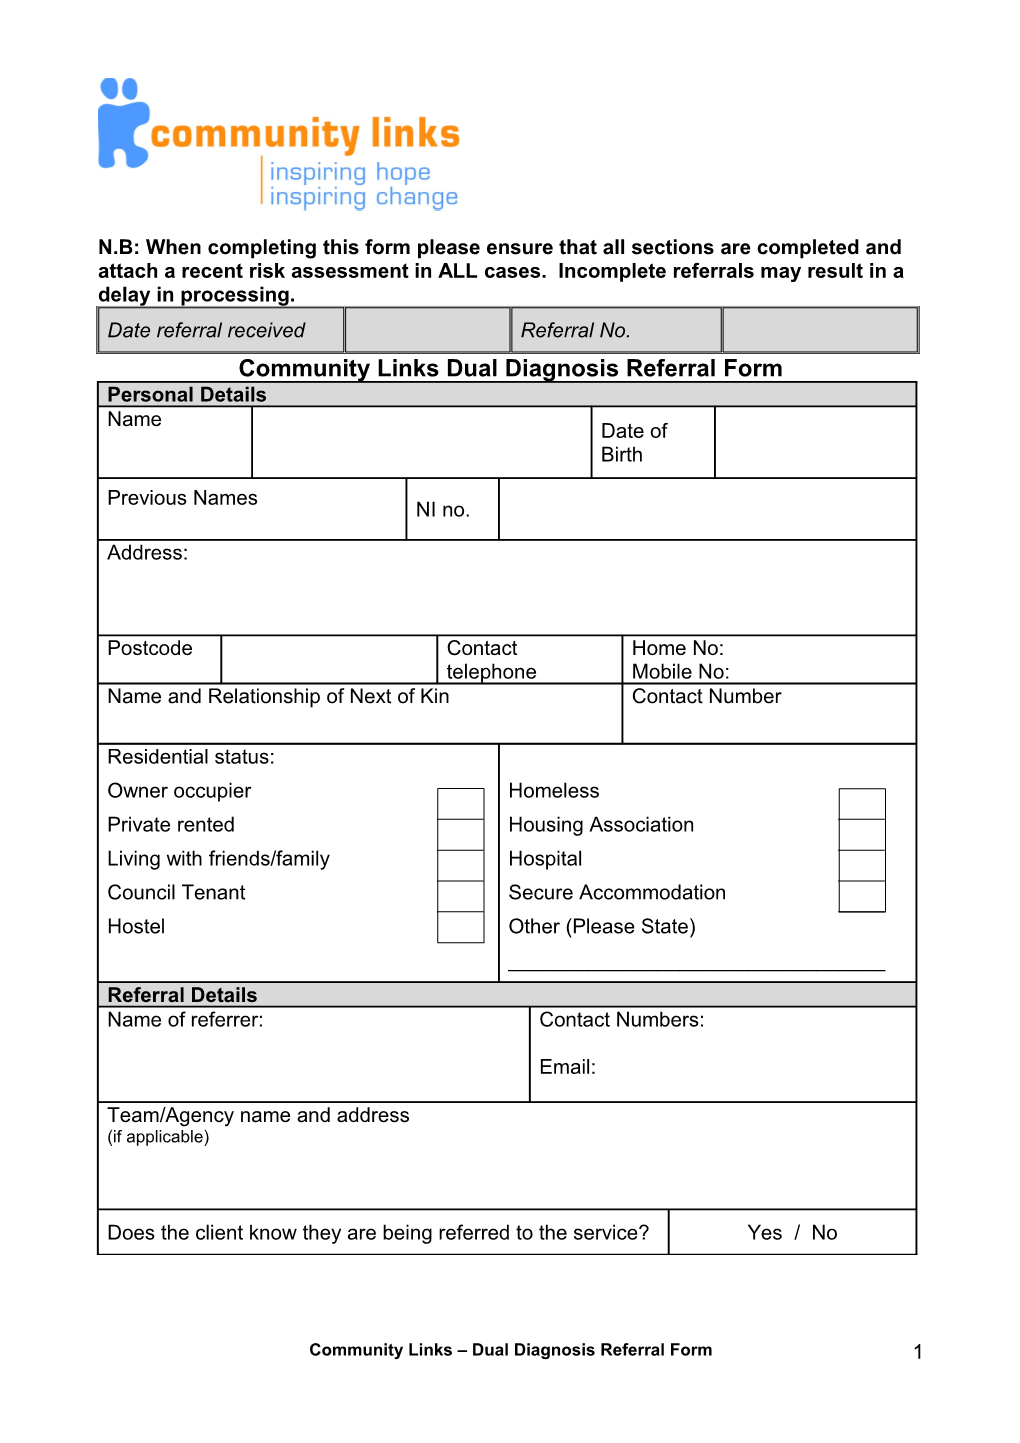 Community Links Dual Diagnosis Referral Form